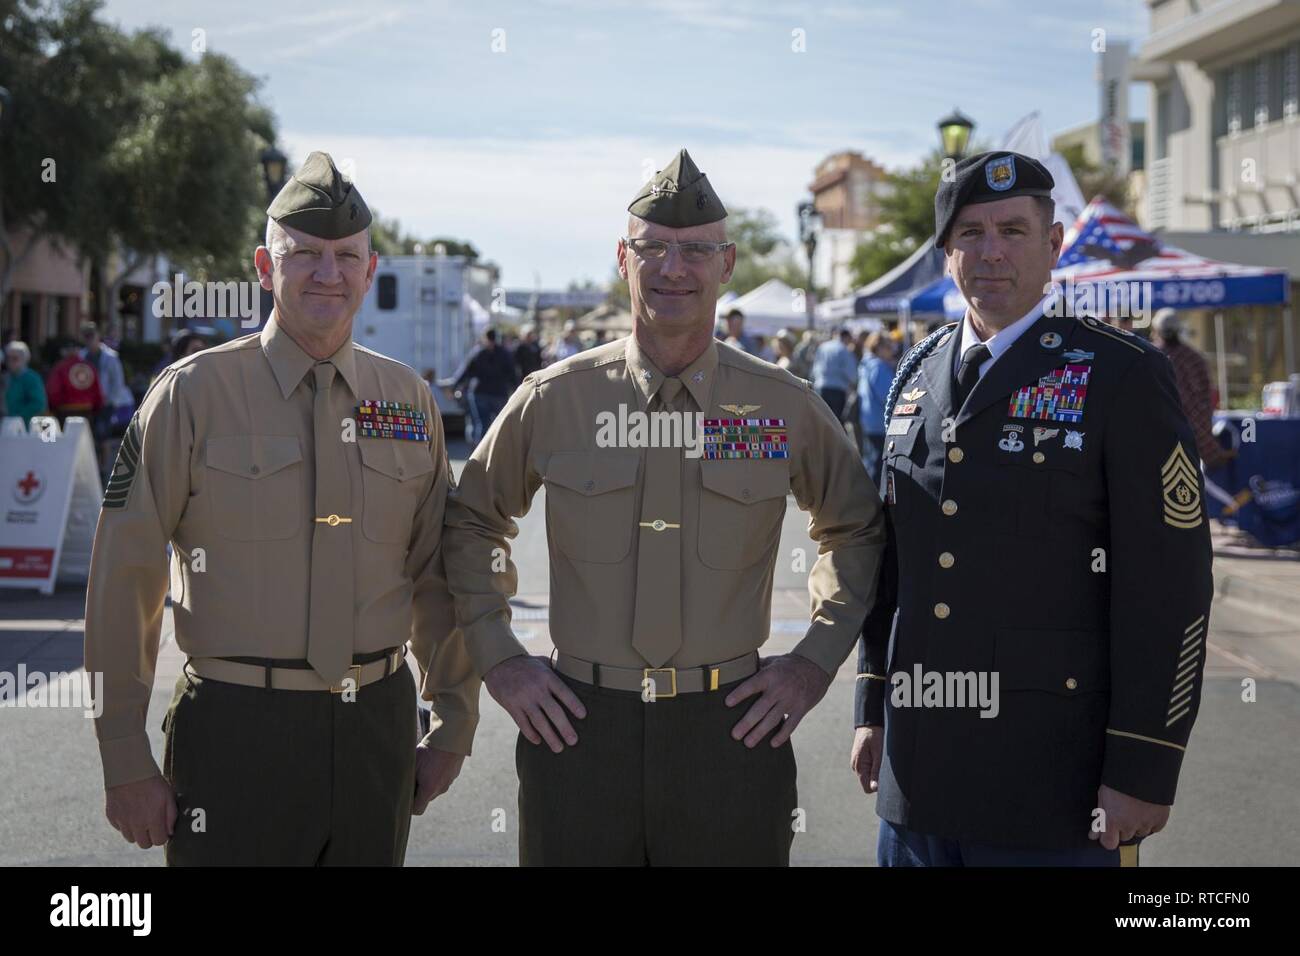 U.S. Marine Corps Col. David A. Suggs (center), commanding officer, Marine Corps Air Station (MCAS) Yuma, Sgt. Maj. David M. Leikwold (left), sergeant major, MCAS Yuma, and U.S. Soldier Sgt. Maj. Jamathon K. Nelson, sergeant major, Yuma Proving Ground pose for a group photo during Yuma Military Appreciation Day in Downtown Historic Yuma on Feb. 16, 2019. Military Appreciation Day is held to show the importance of the relationship between the City of Yuma and our service members and veterans. Stock Photo